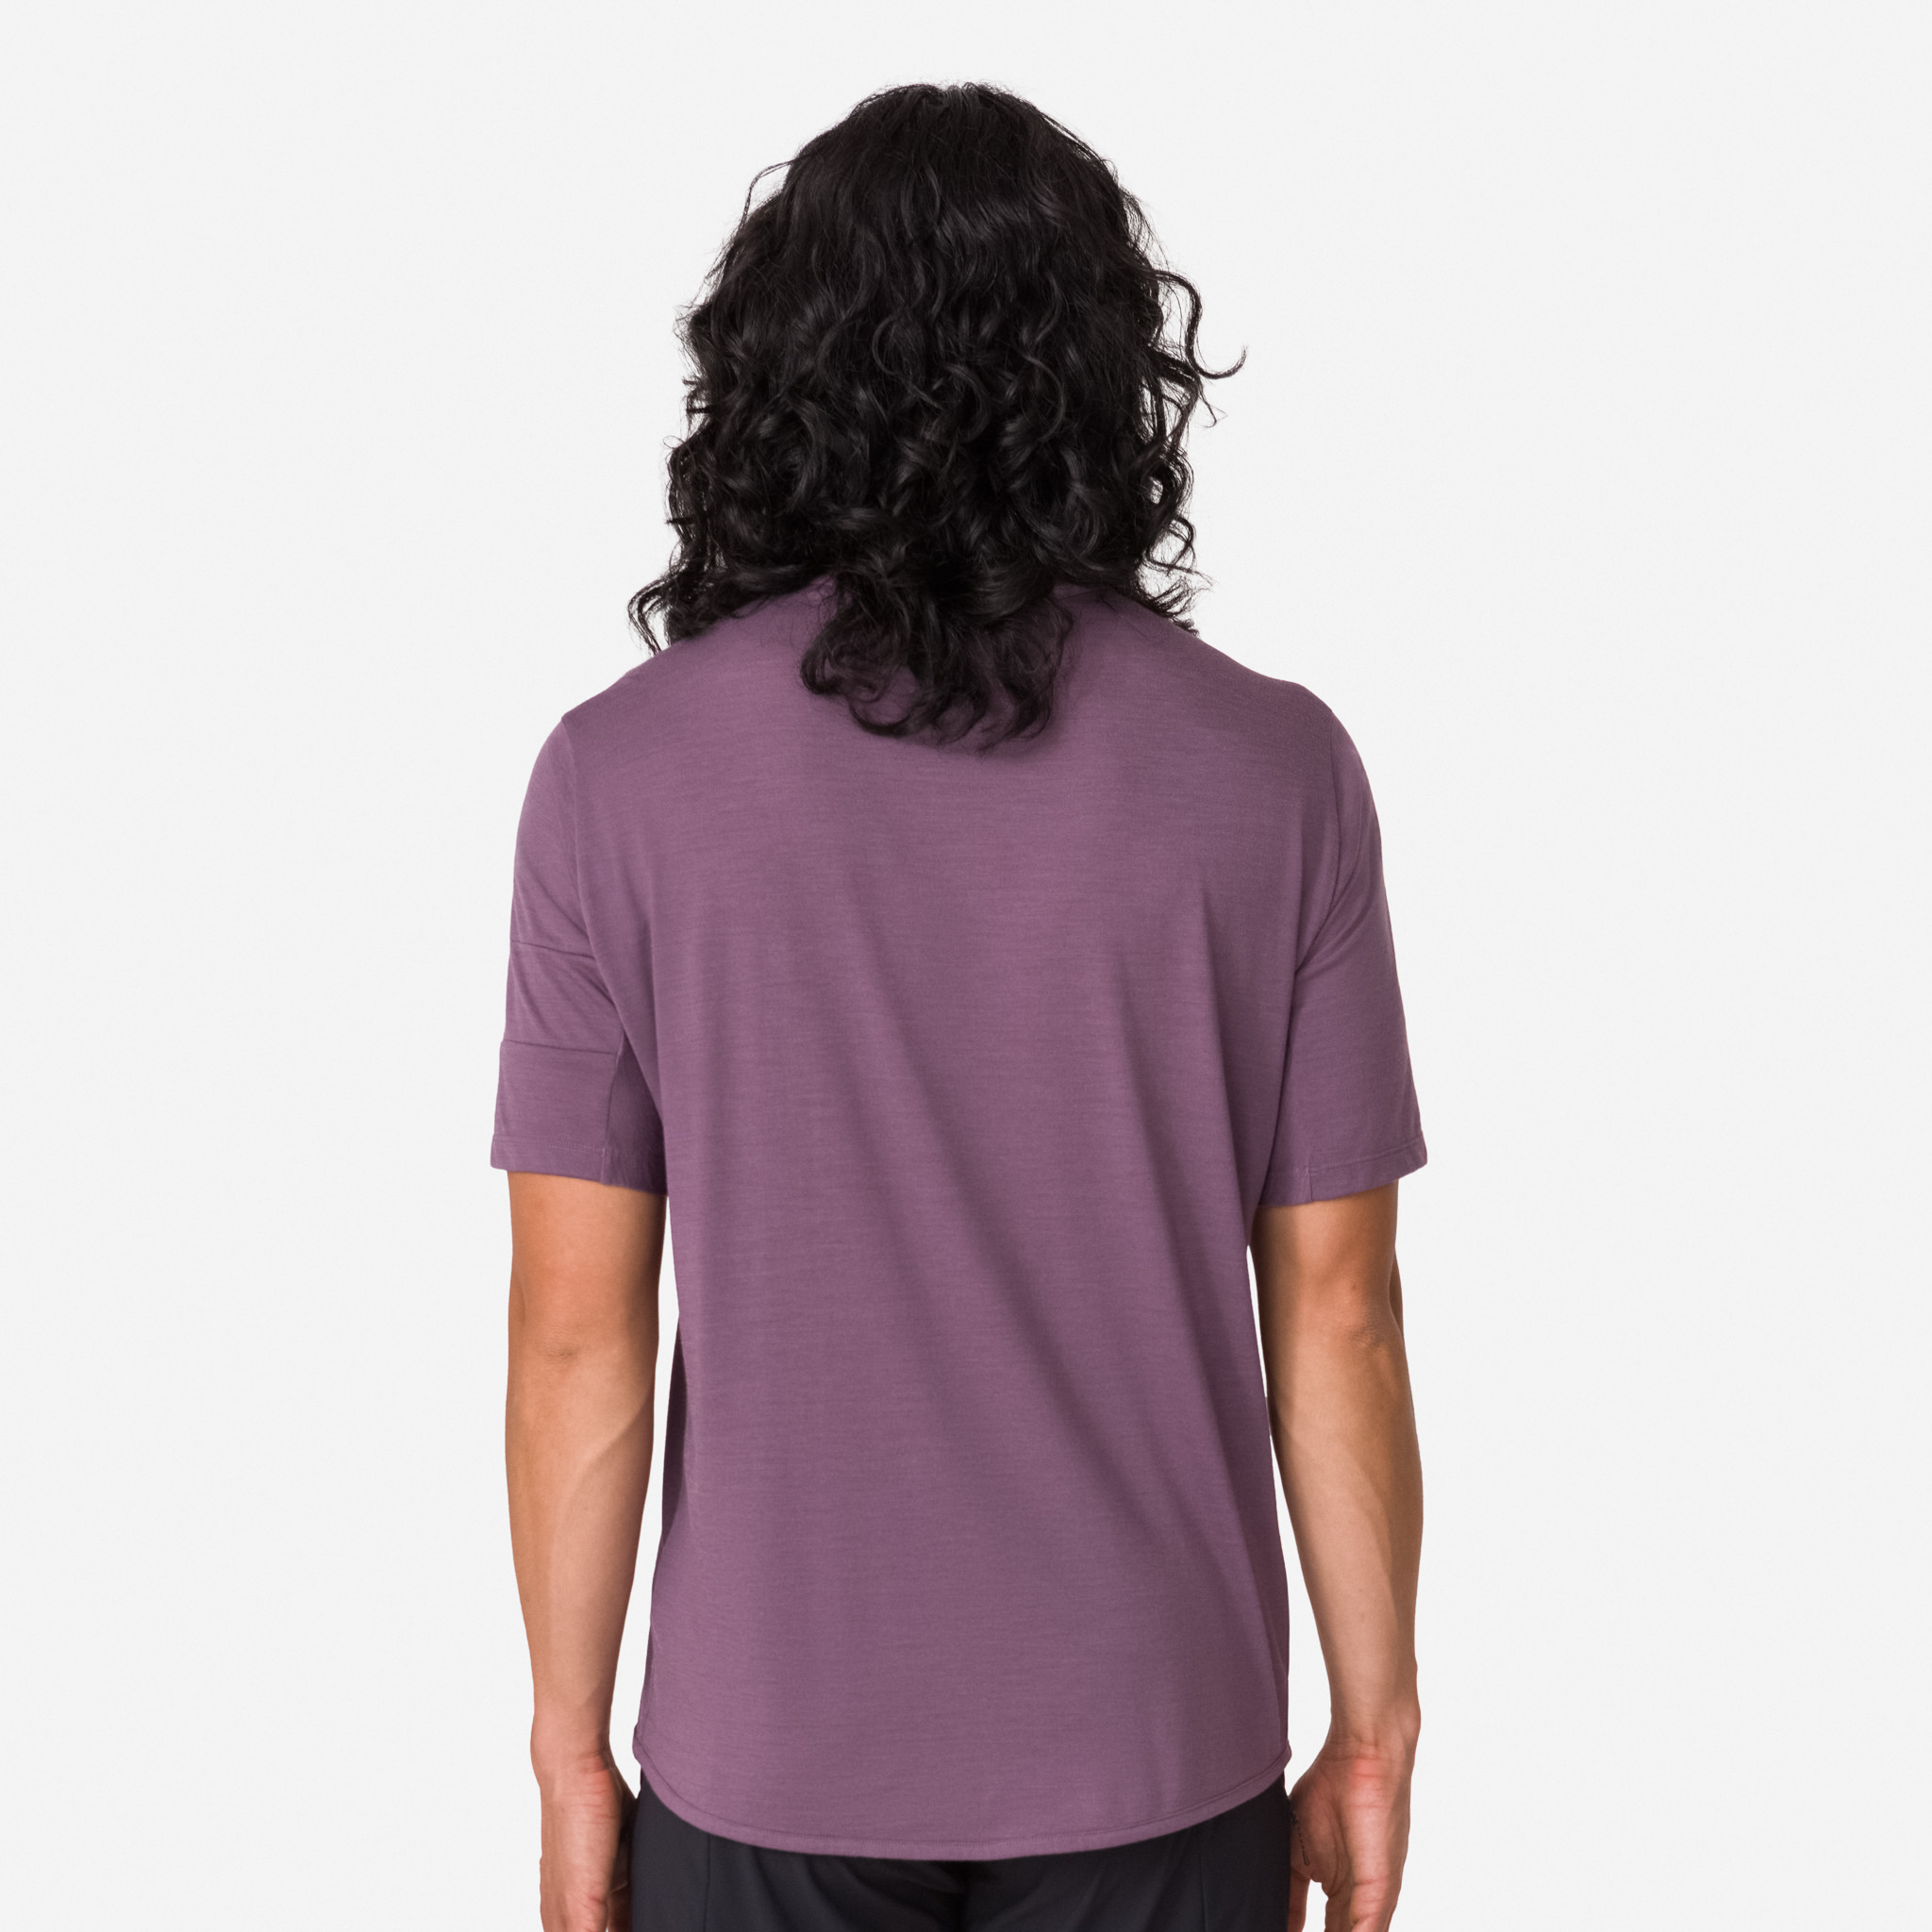 Caps T-shirt Boxy Fit in Purple